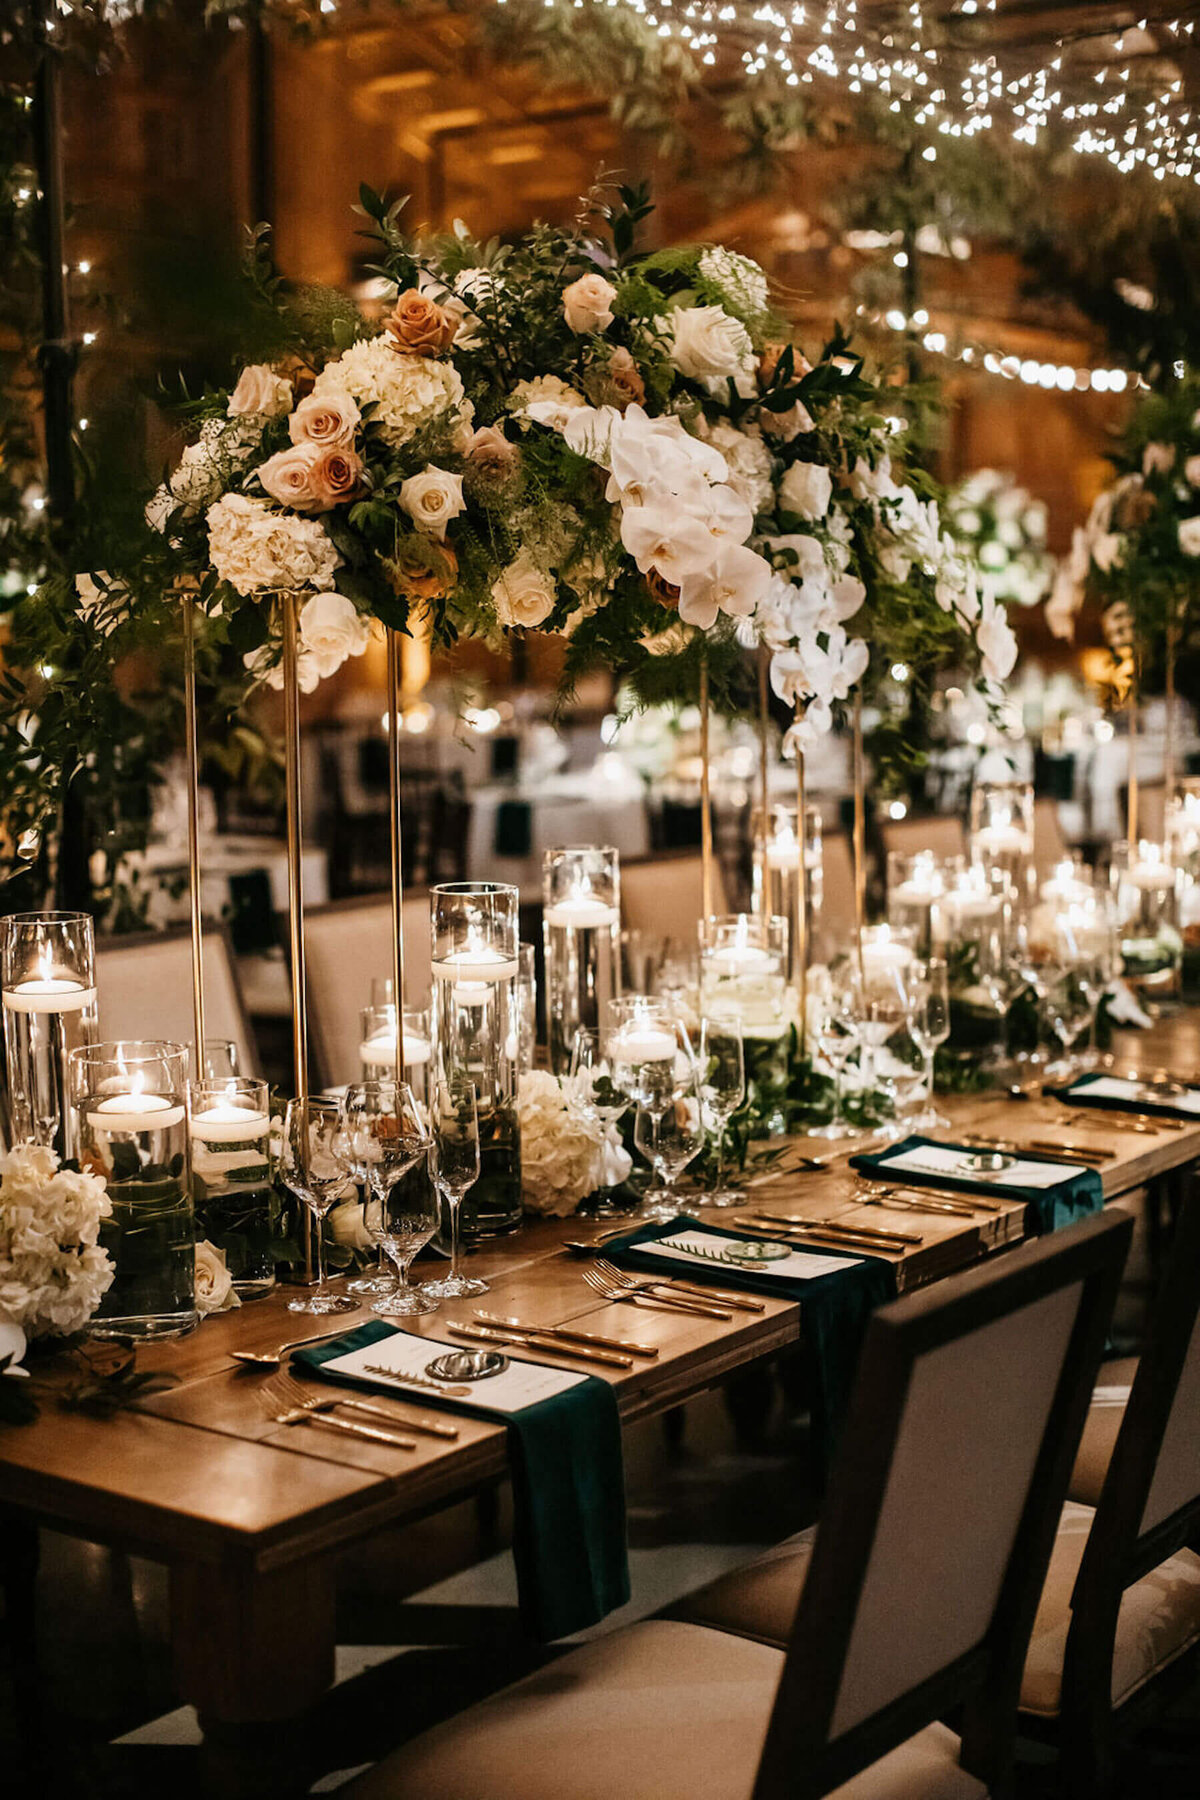 Classy wedding head table with green and white flowers with gold touches